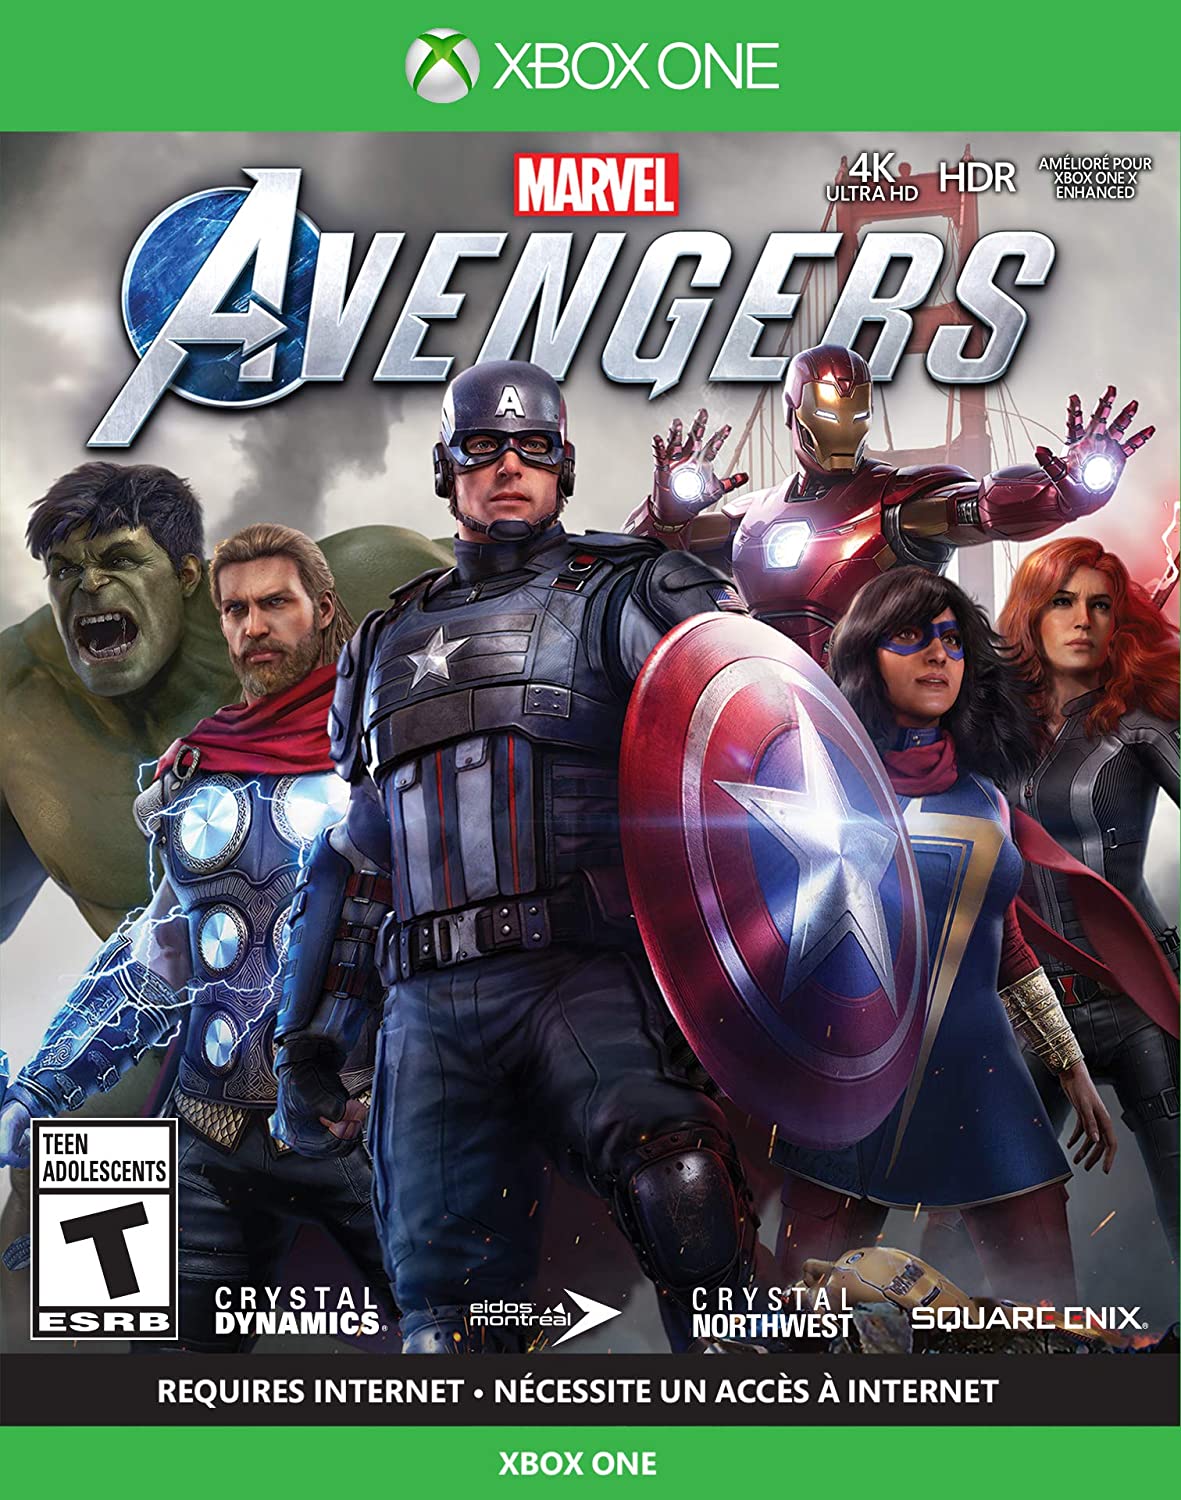 Marvels Avengers for Xbox One